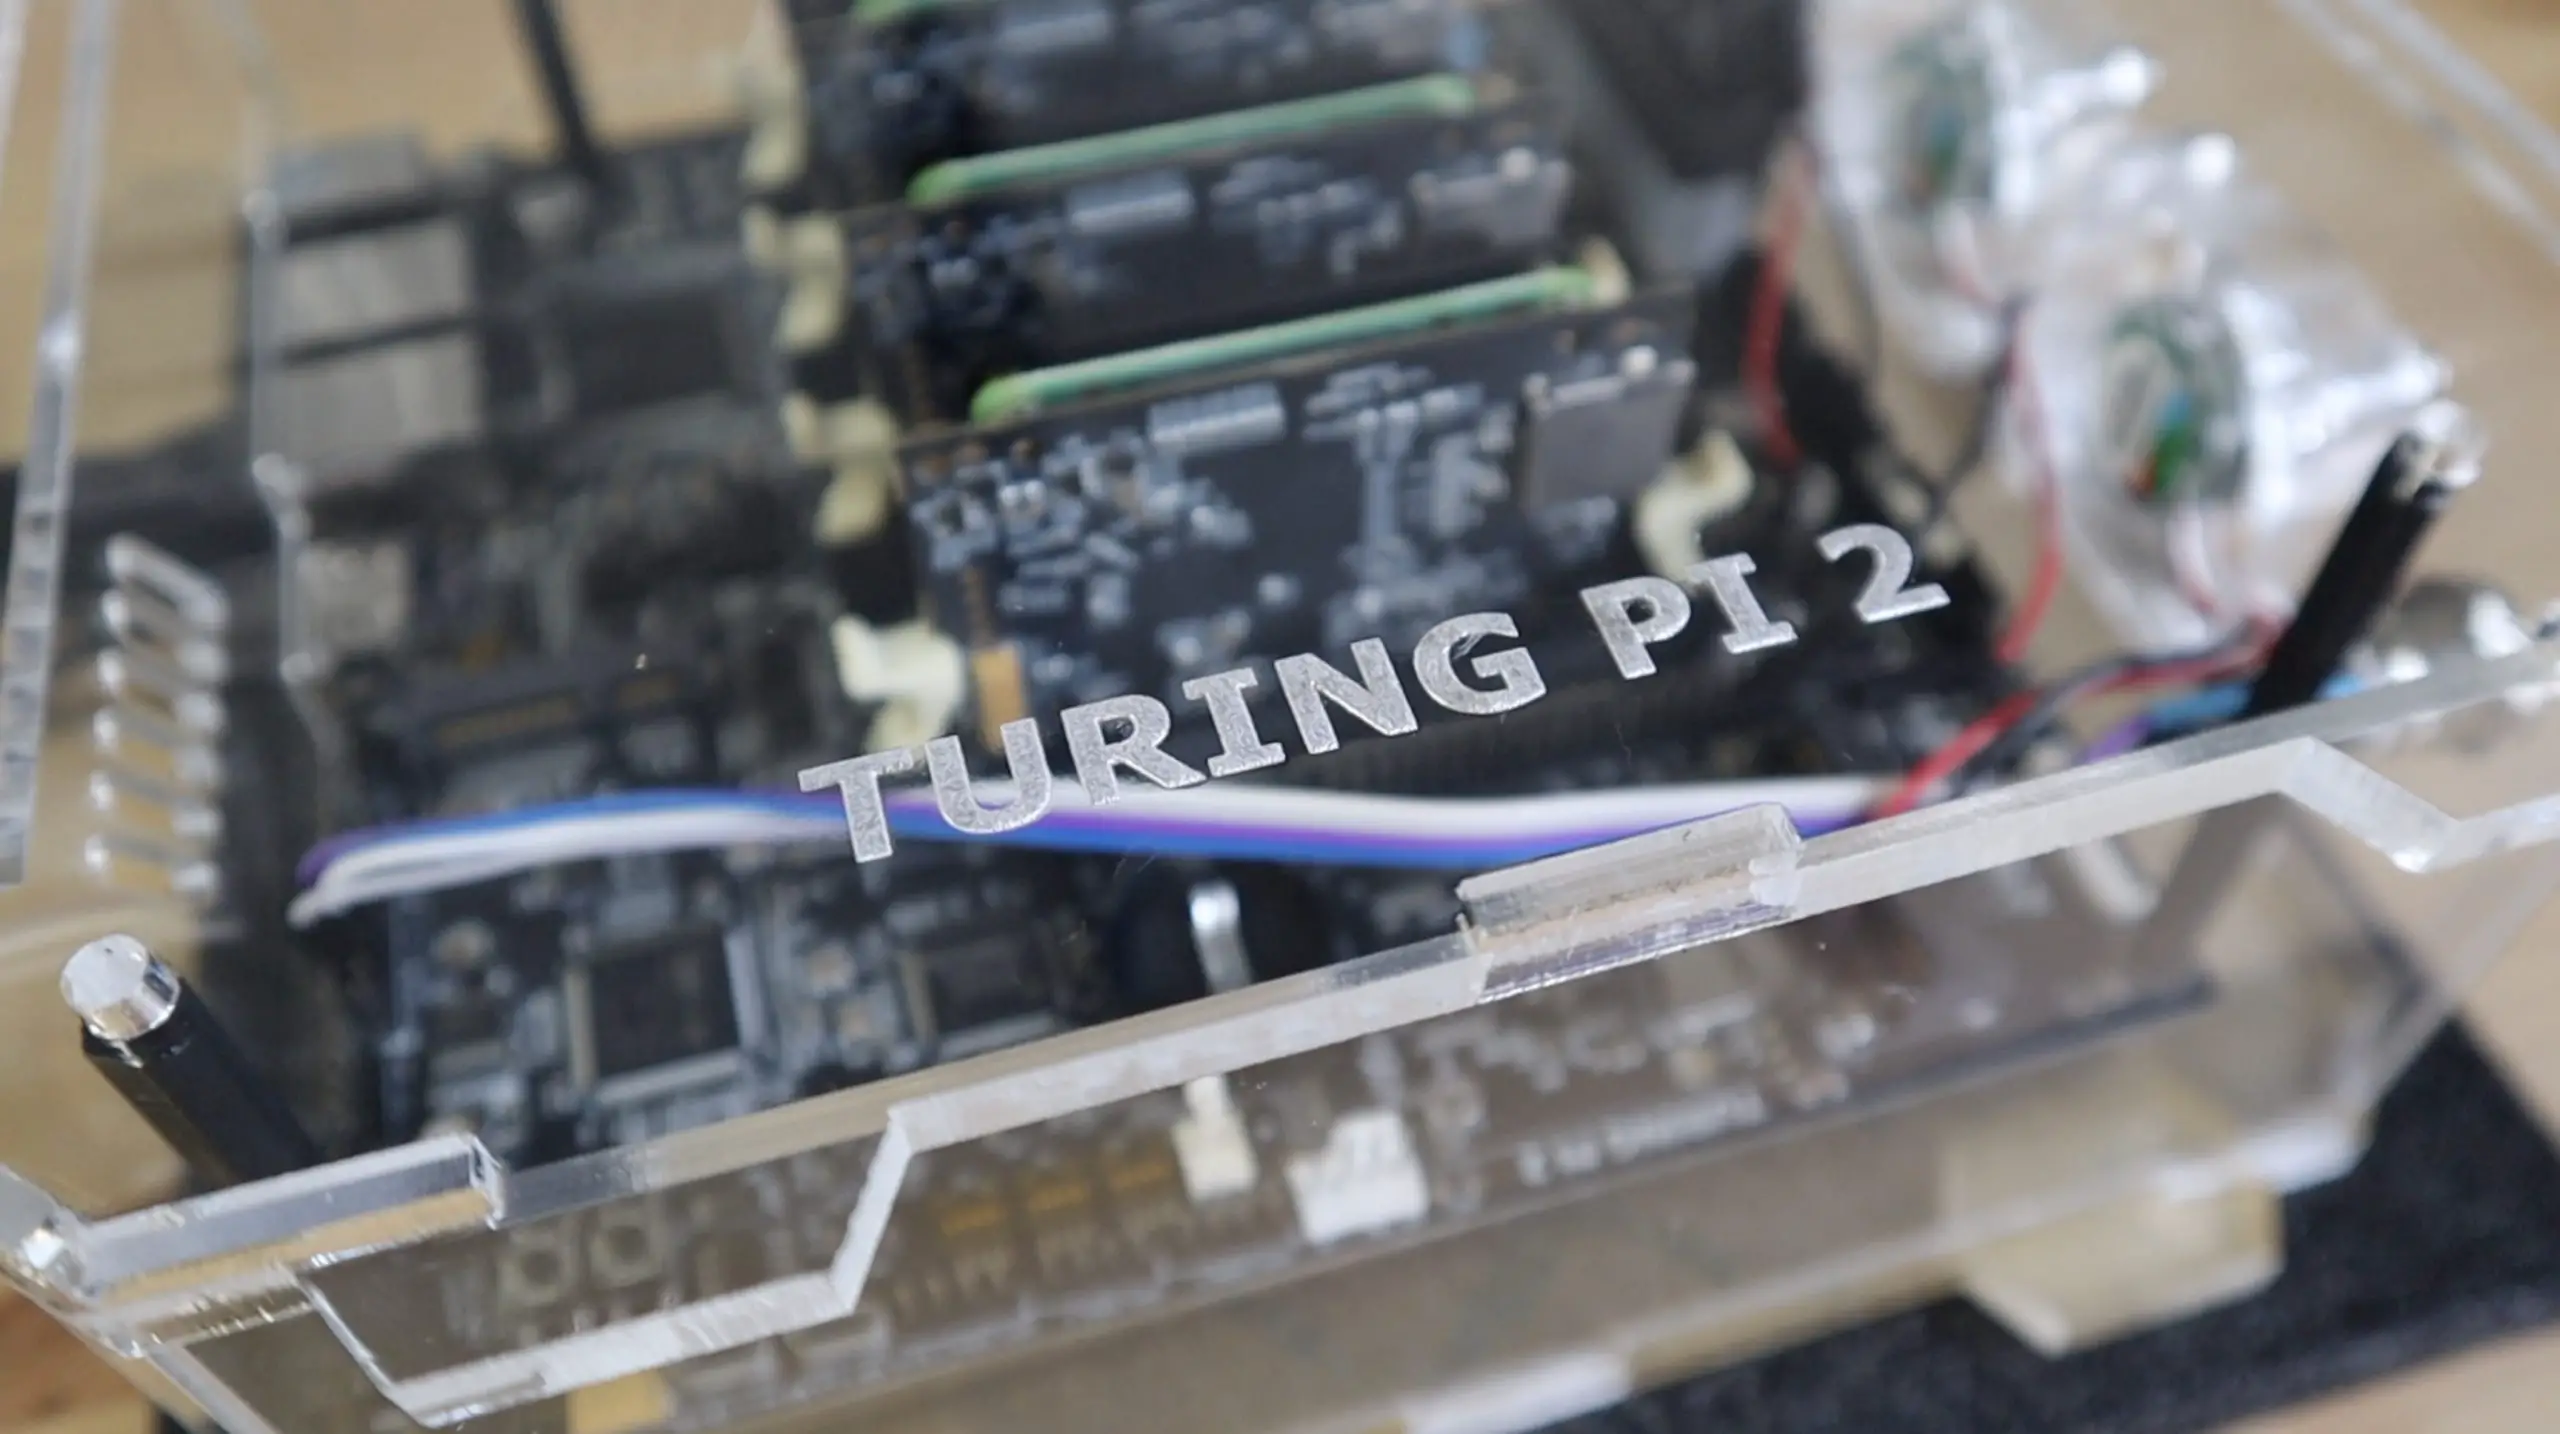 Turing Pi 2 Text On Case Side